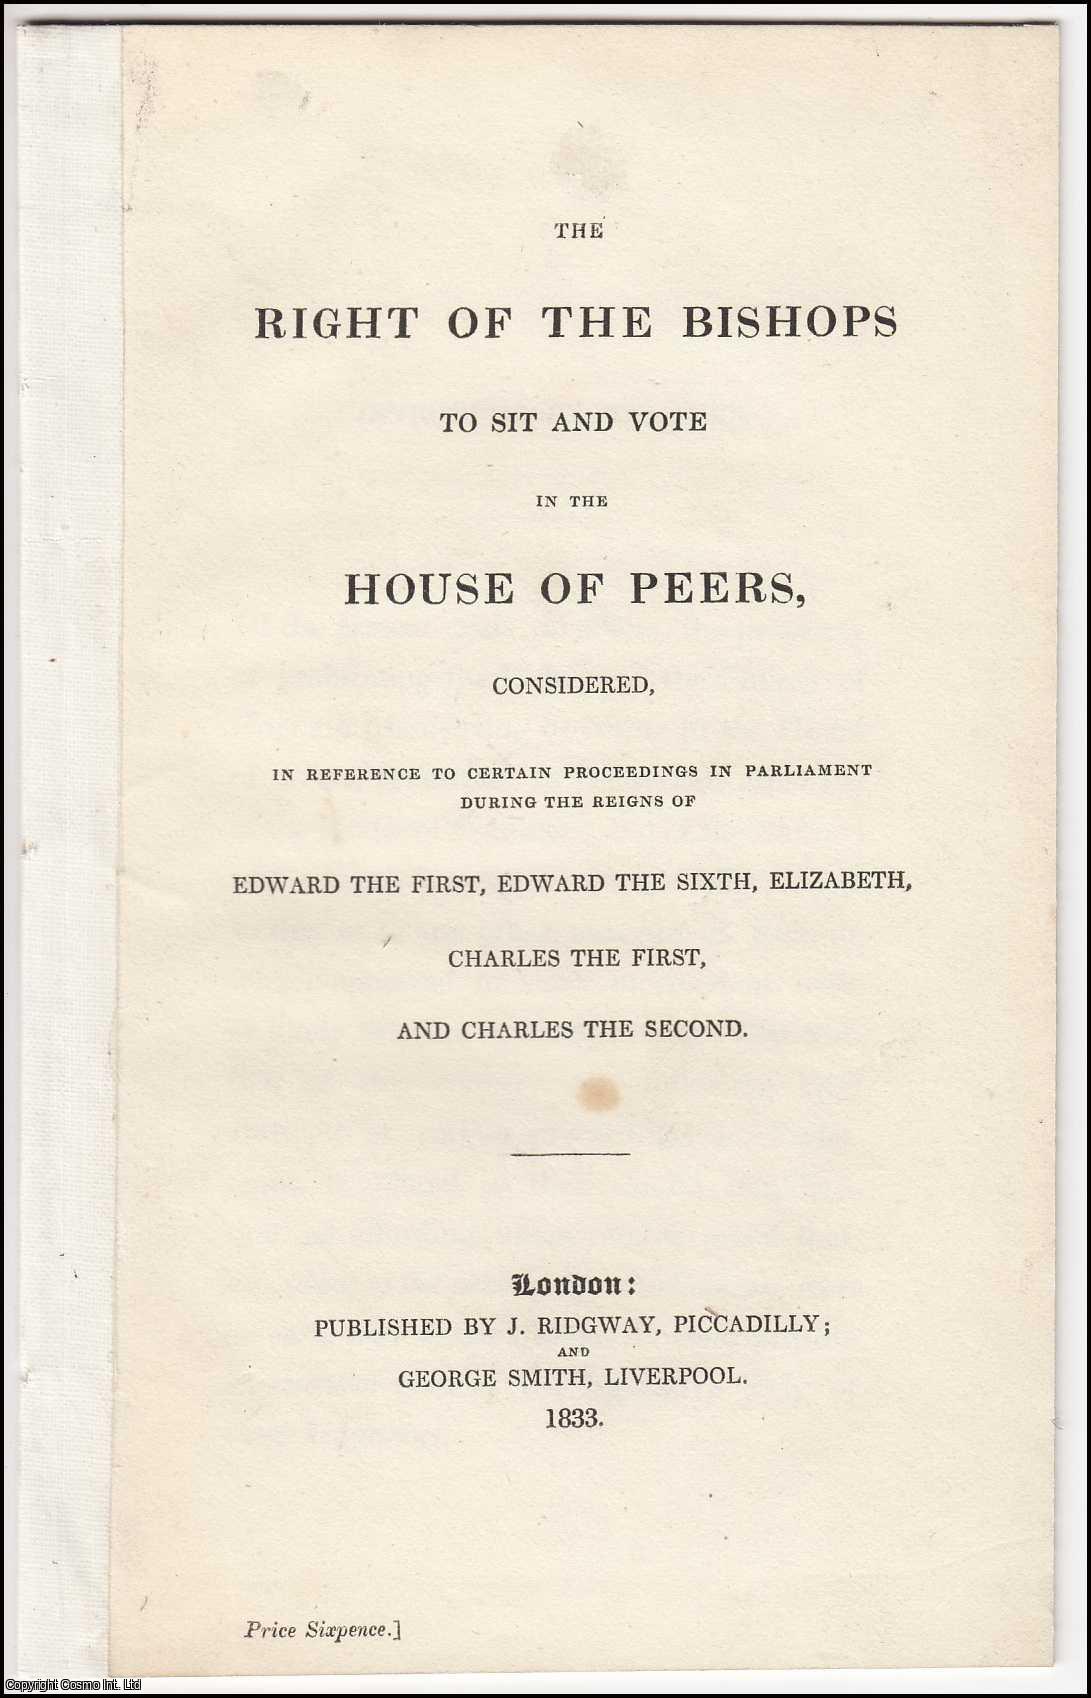 --- - [1833] The Right of The Bishops to Sit and Vote in the House of Peers, considered, in Reference to Certain Proceedings in Parliament during the Reigns of Edward the First, Edward the Sixth, Elizabeth, Charles the First, and Charles the Second.